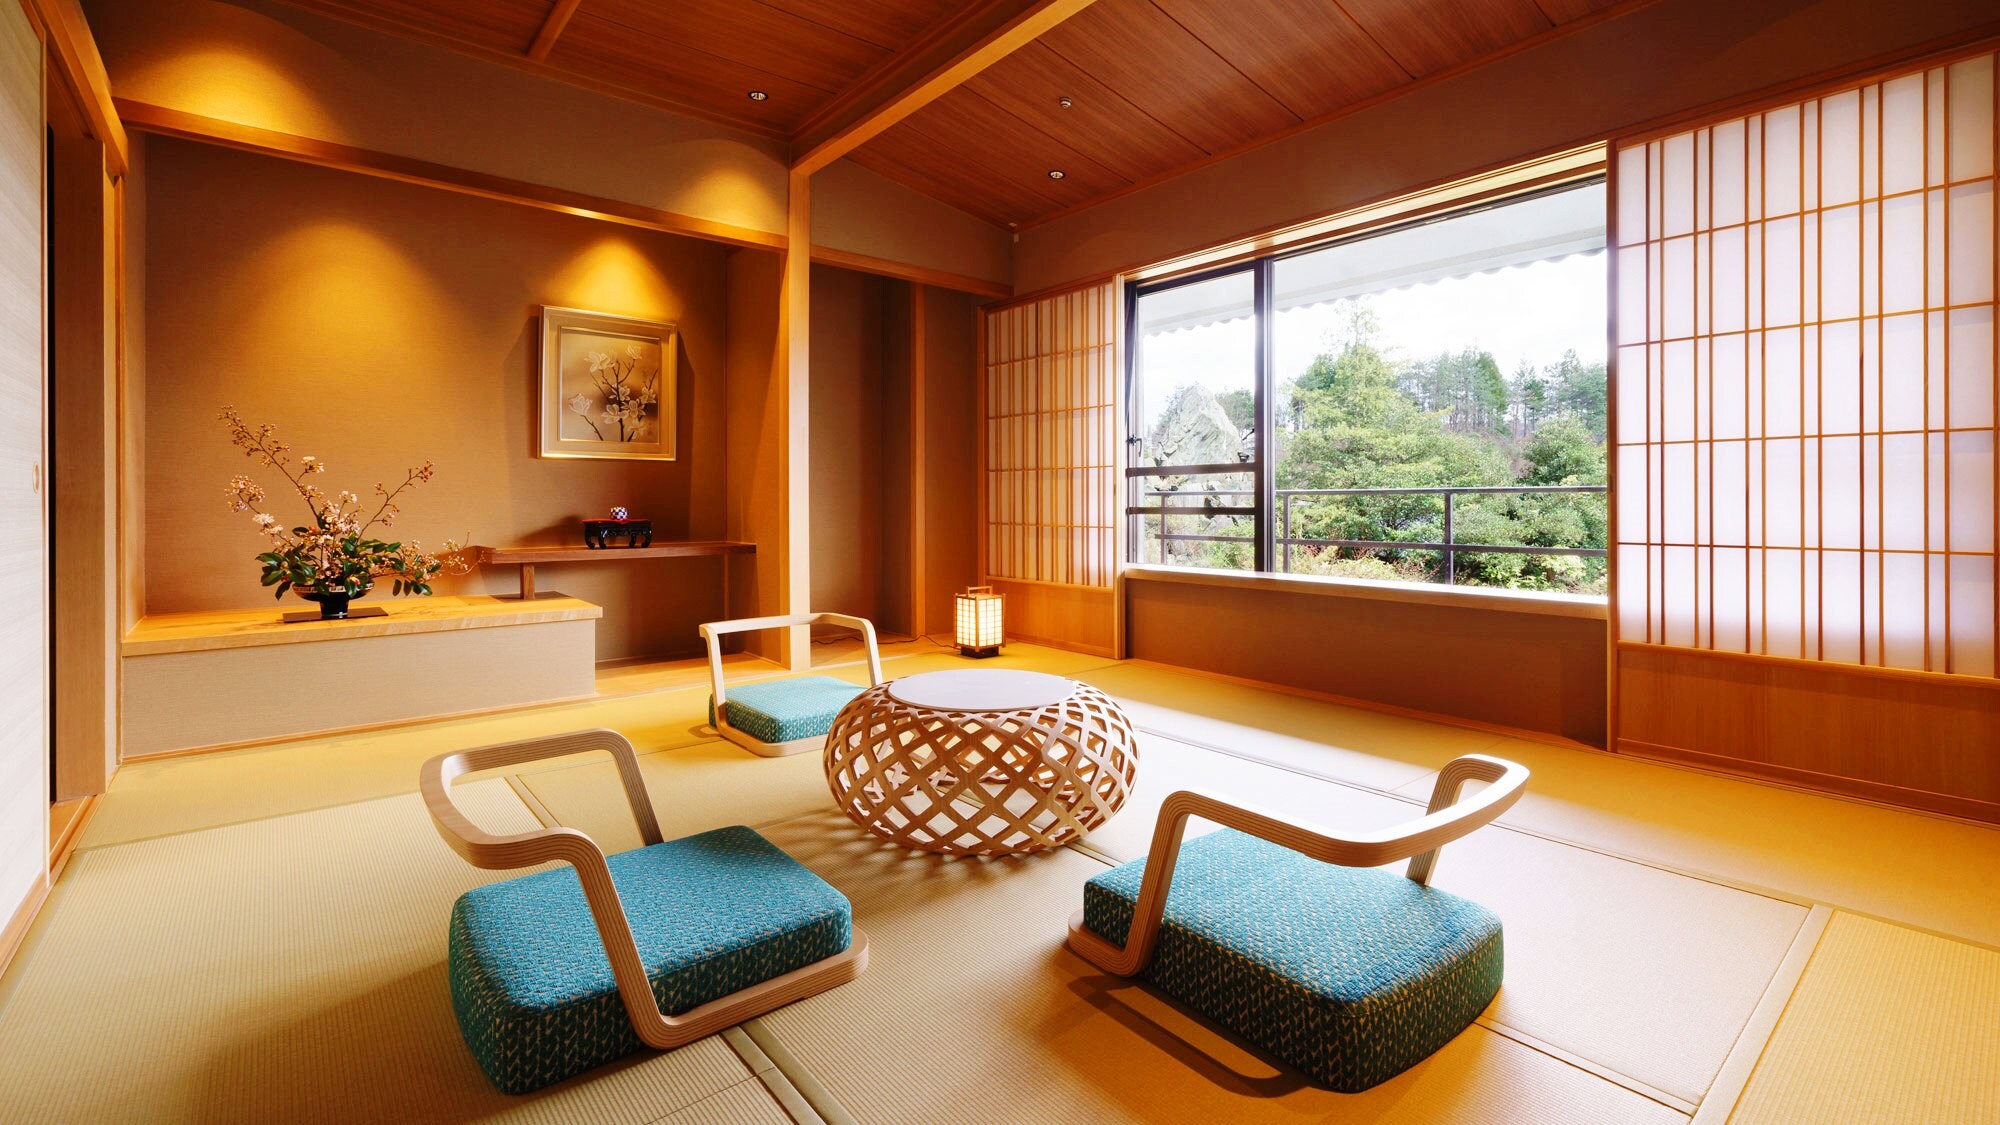 Deluxe Japanese-Western style room (Japanese-style room 10 tatami mats)